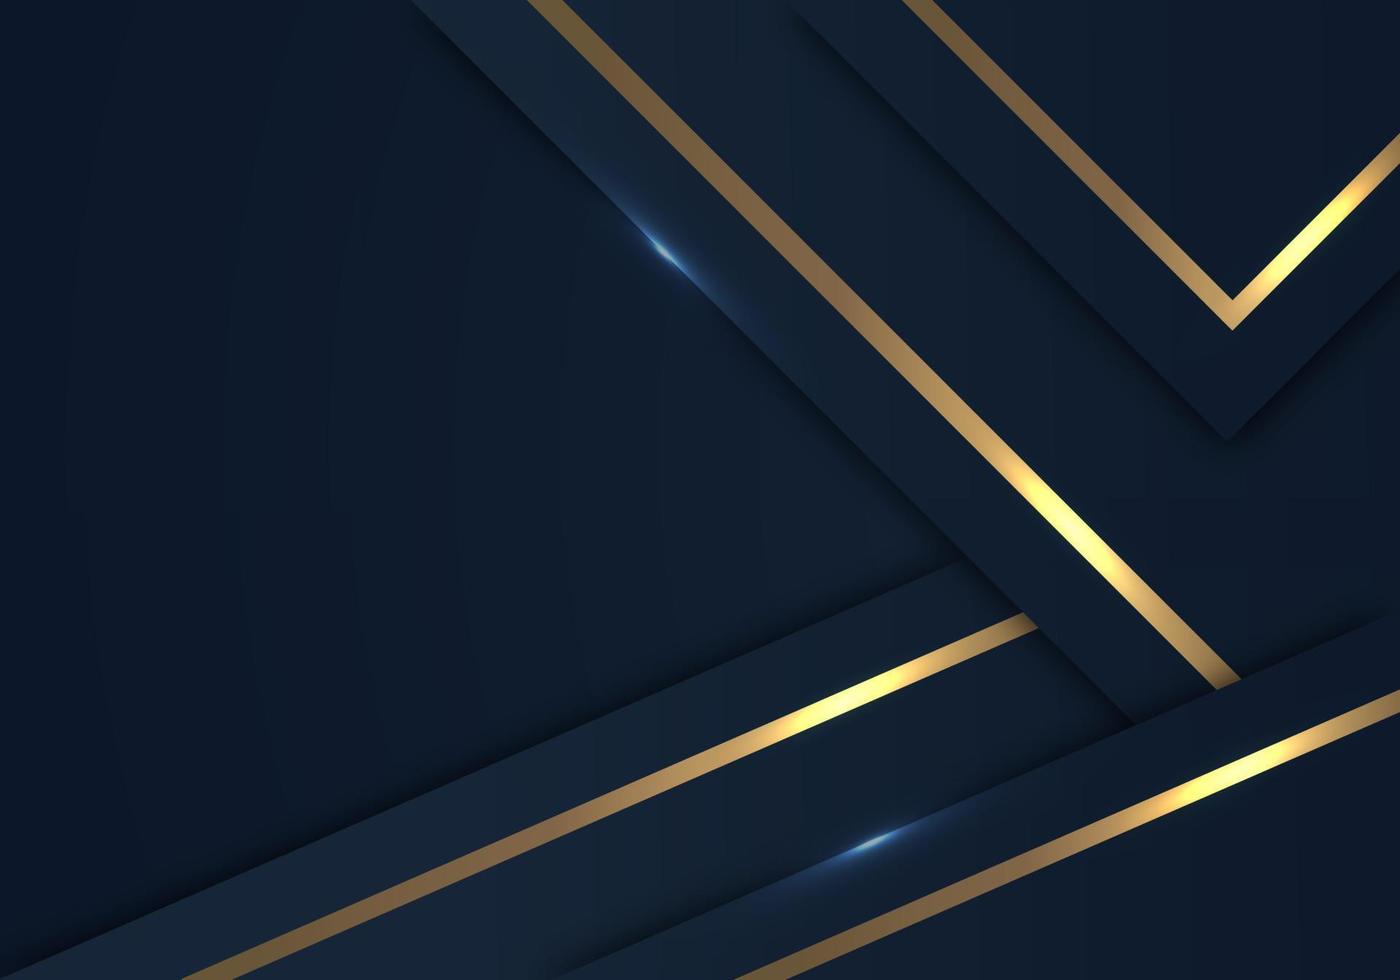 Abstract Shiny Gold Lines Diagonal Overlap Luxurious Dark Navy Purple Background with Copy Space for Text vector